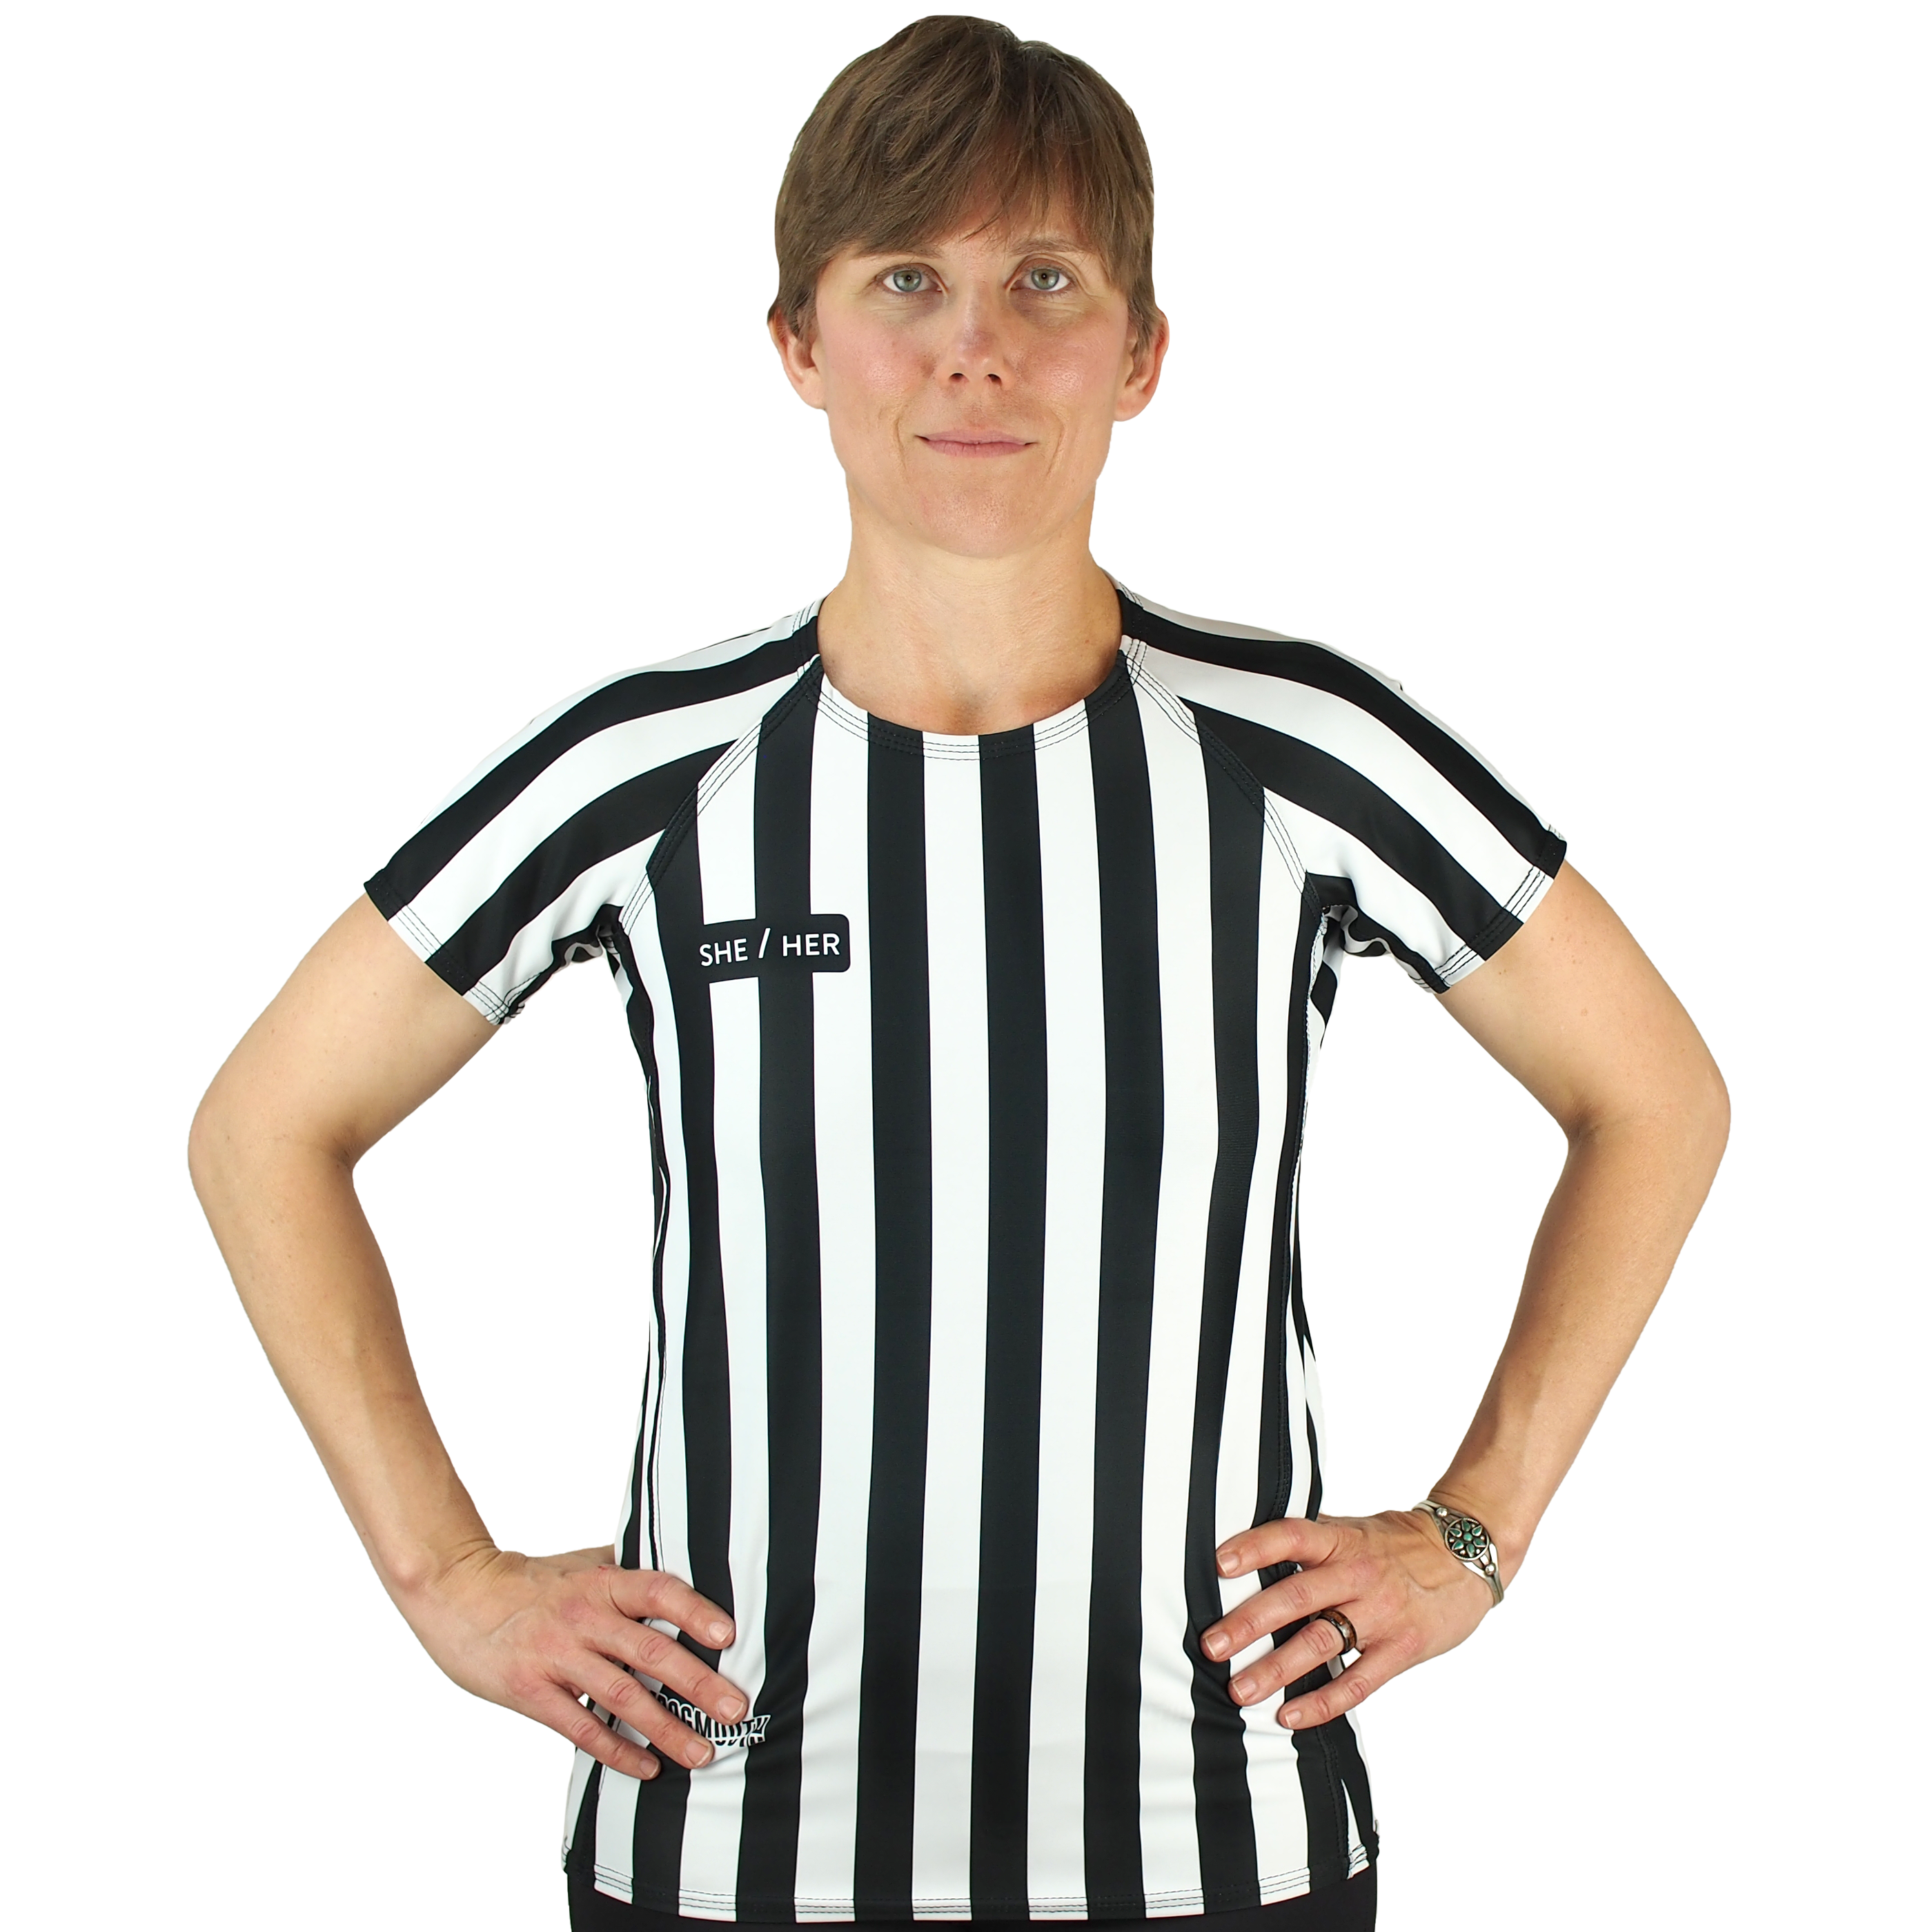 Referee Pants – Purchase Officials Supplies